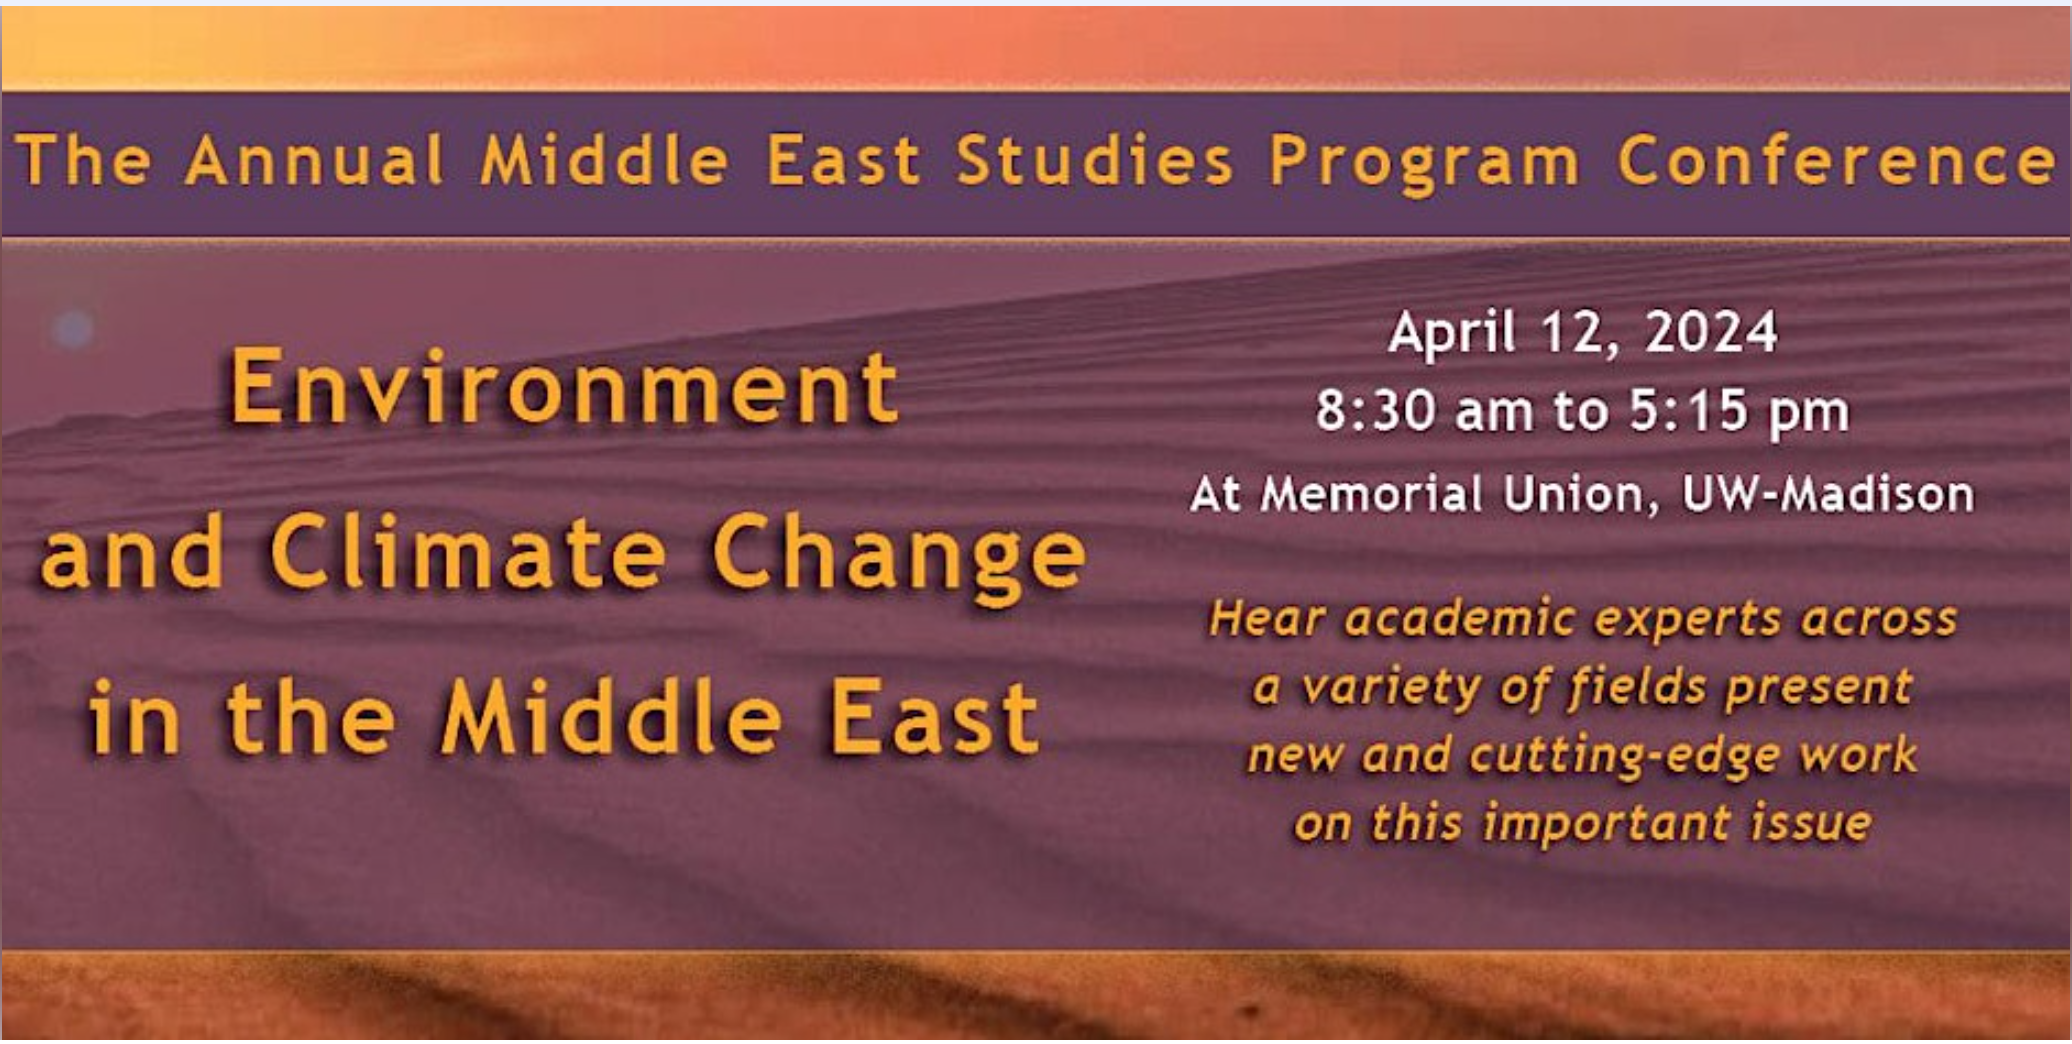 Annual Conference: Environment and Climate Change in the Middle East